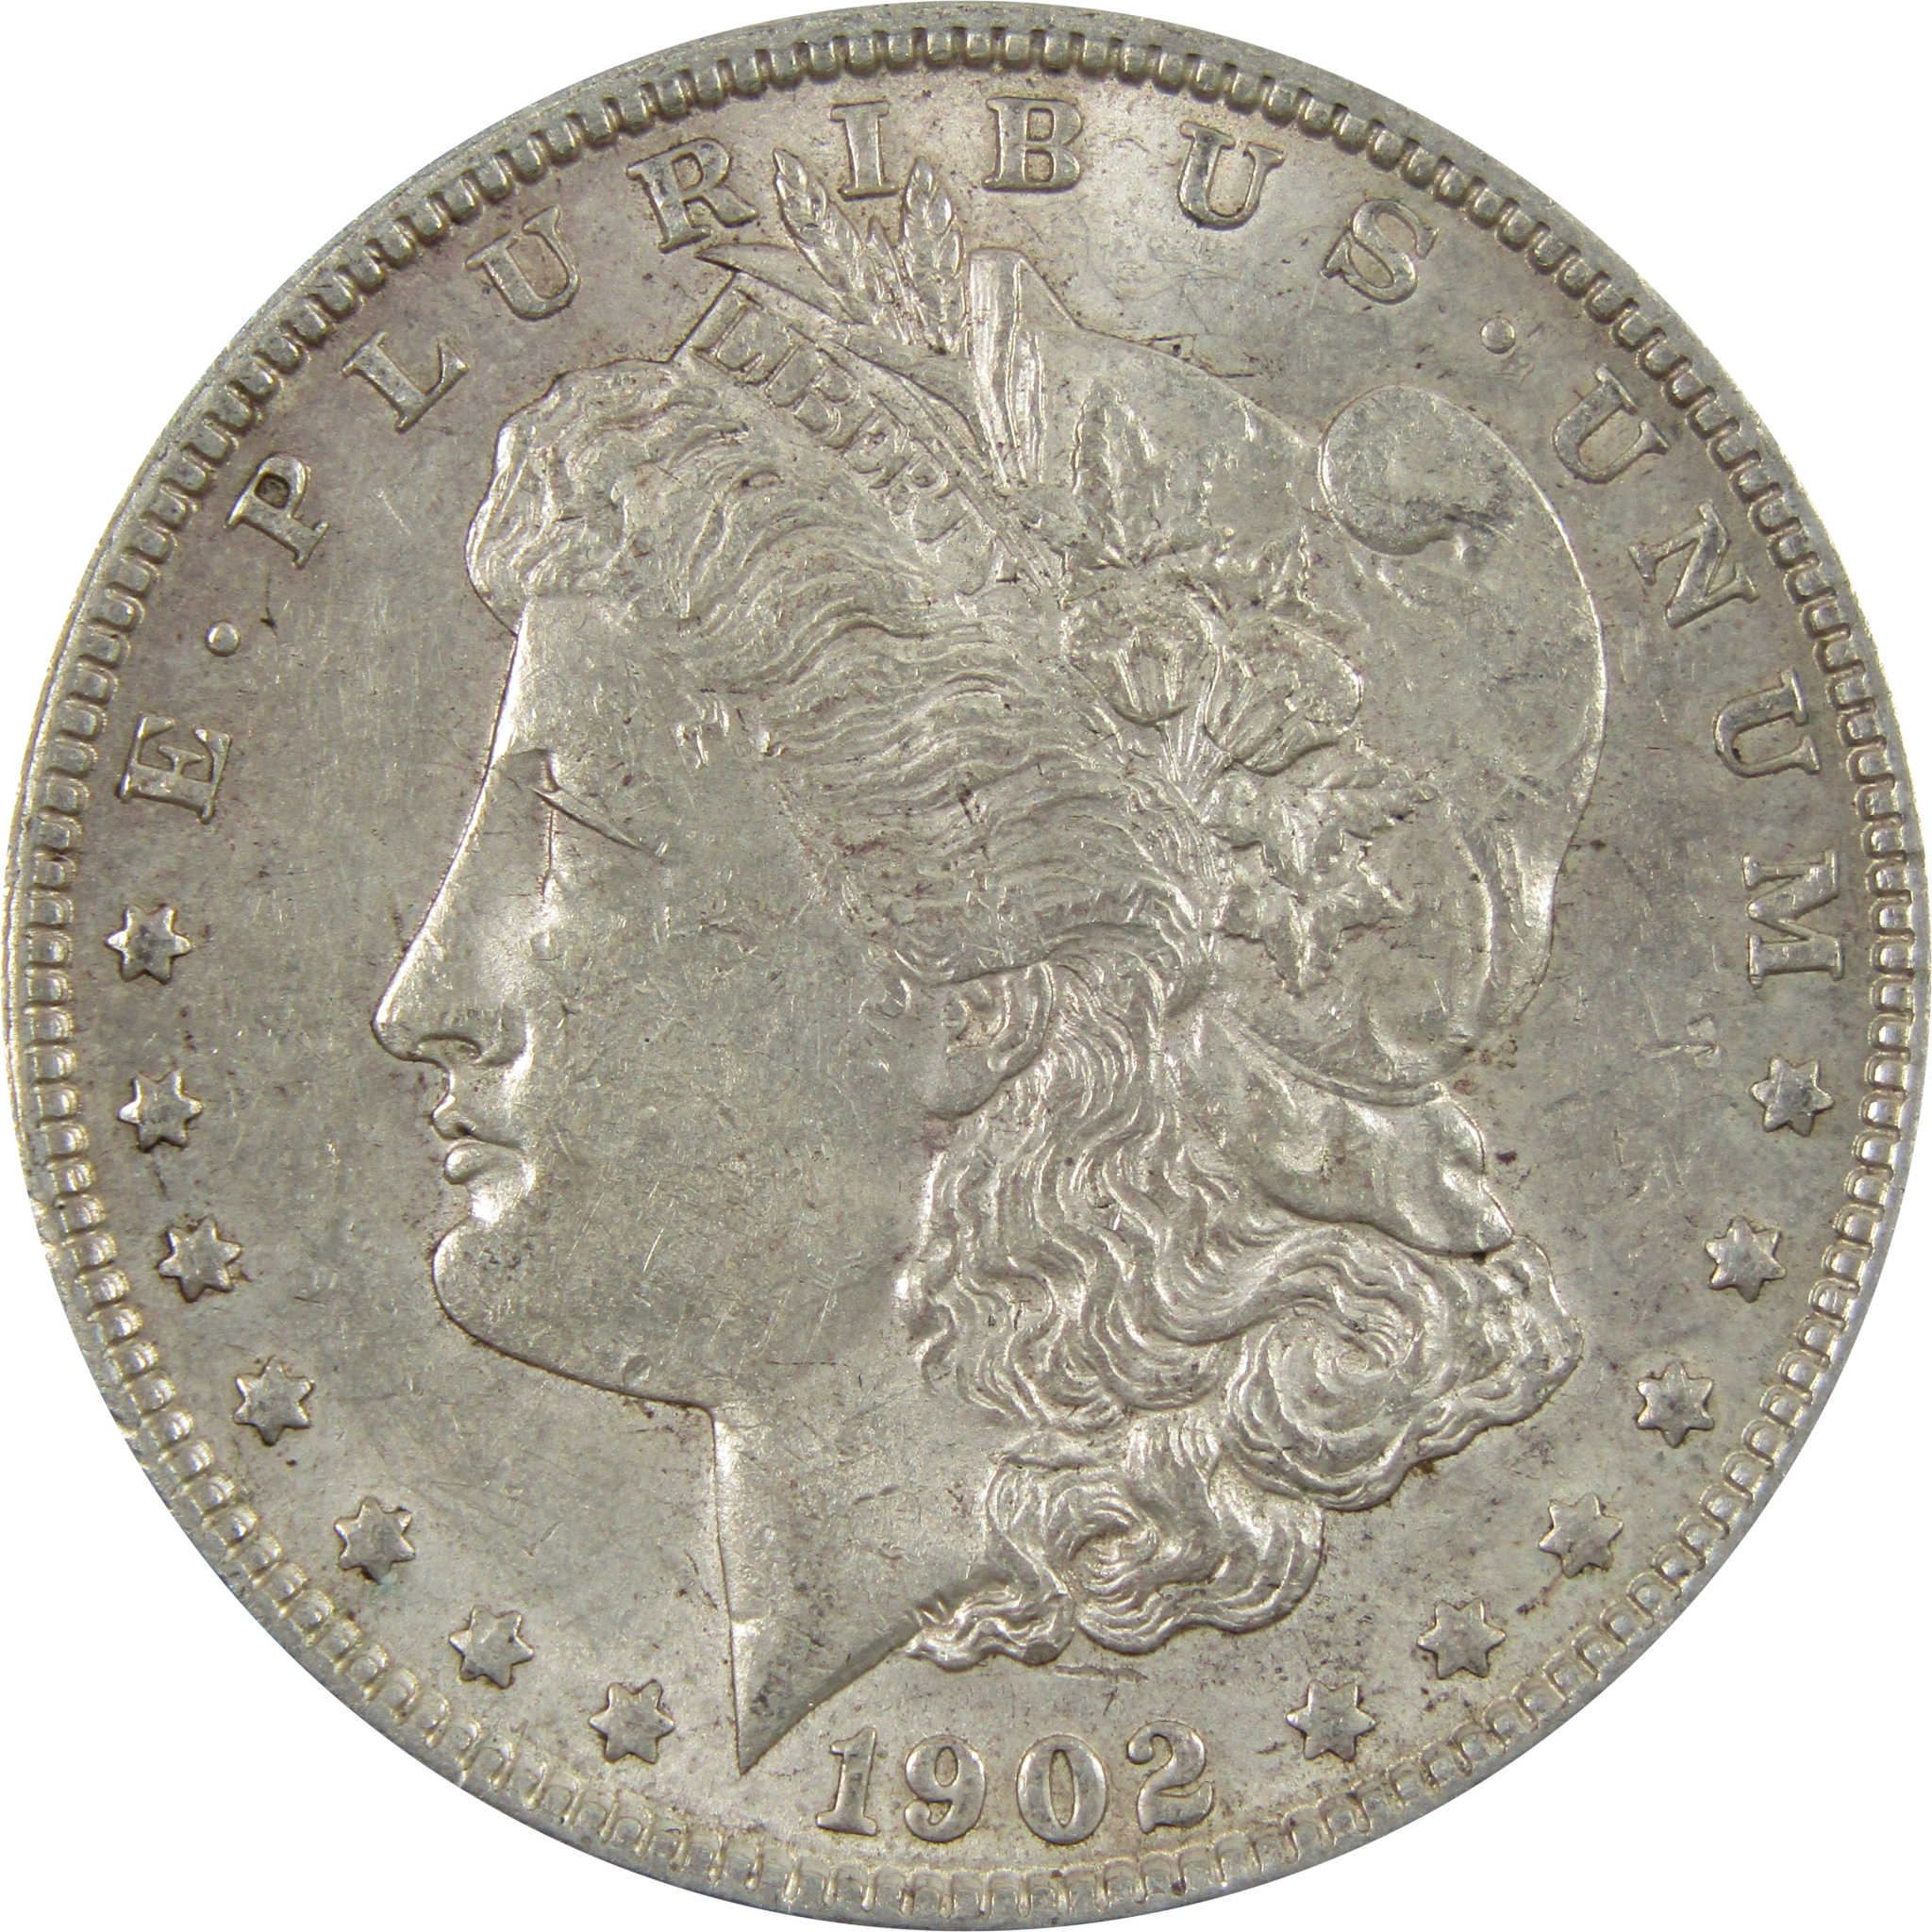 1902 Morgan Dollar XF EF Extremely Fine 90% Silver $1 Coin SKU:I4743 - Morgan coin - Morgan silver dollar - Morgan silver dollar for sale - Profile Coins &amp; Collectibles